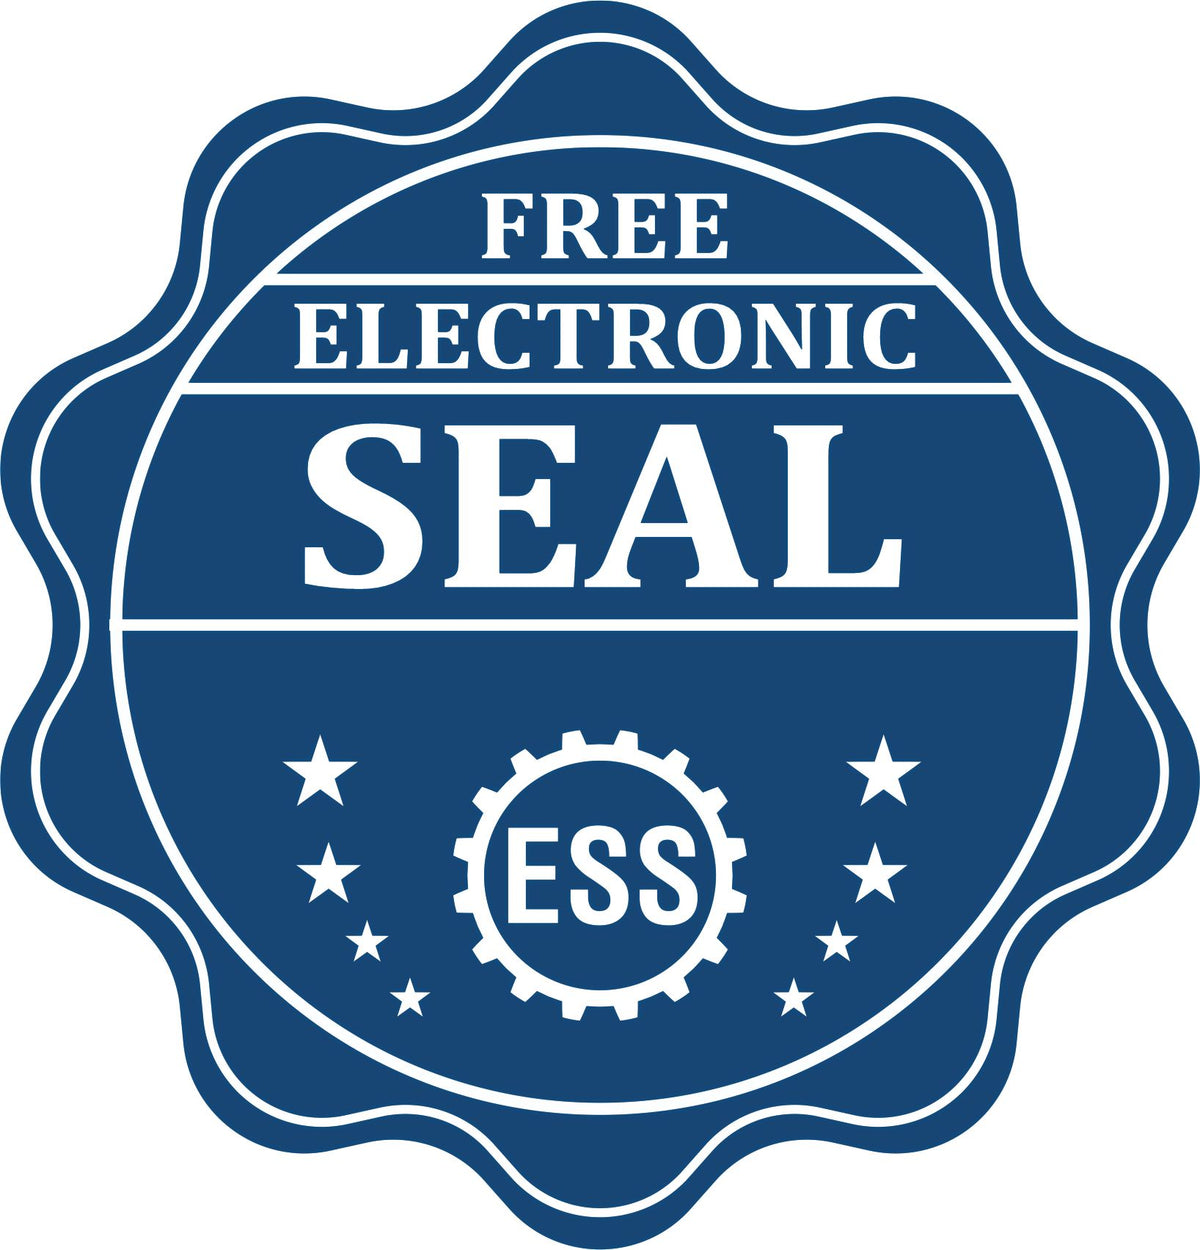 A badge showing a free electronic seal for the Handheld Connecticut Professional Engineer Embosser with stars and the ESS gear on the emblem.